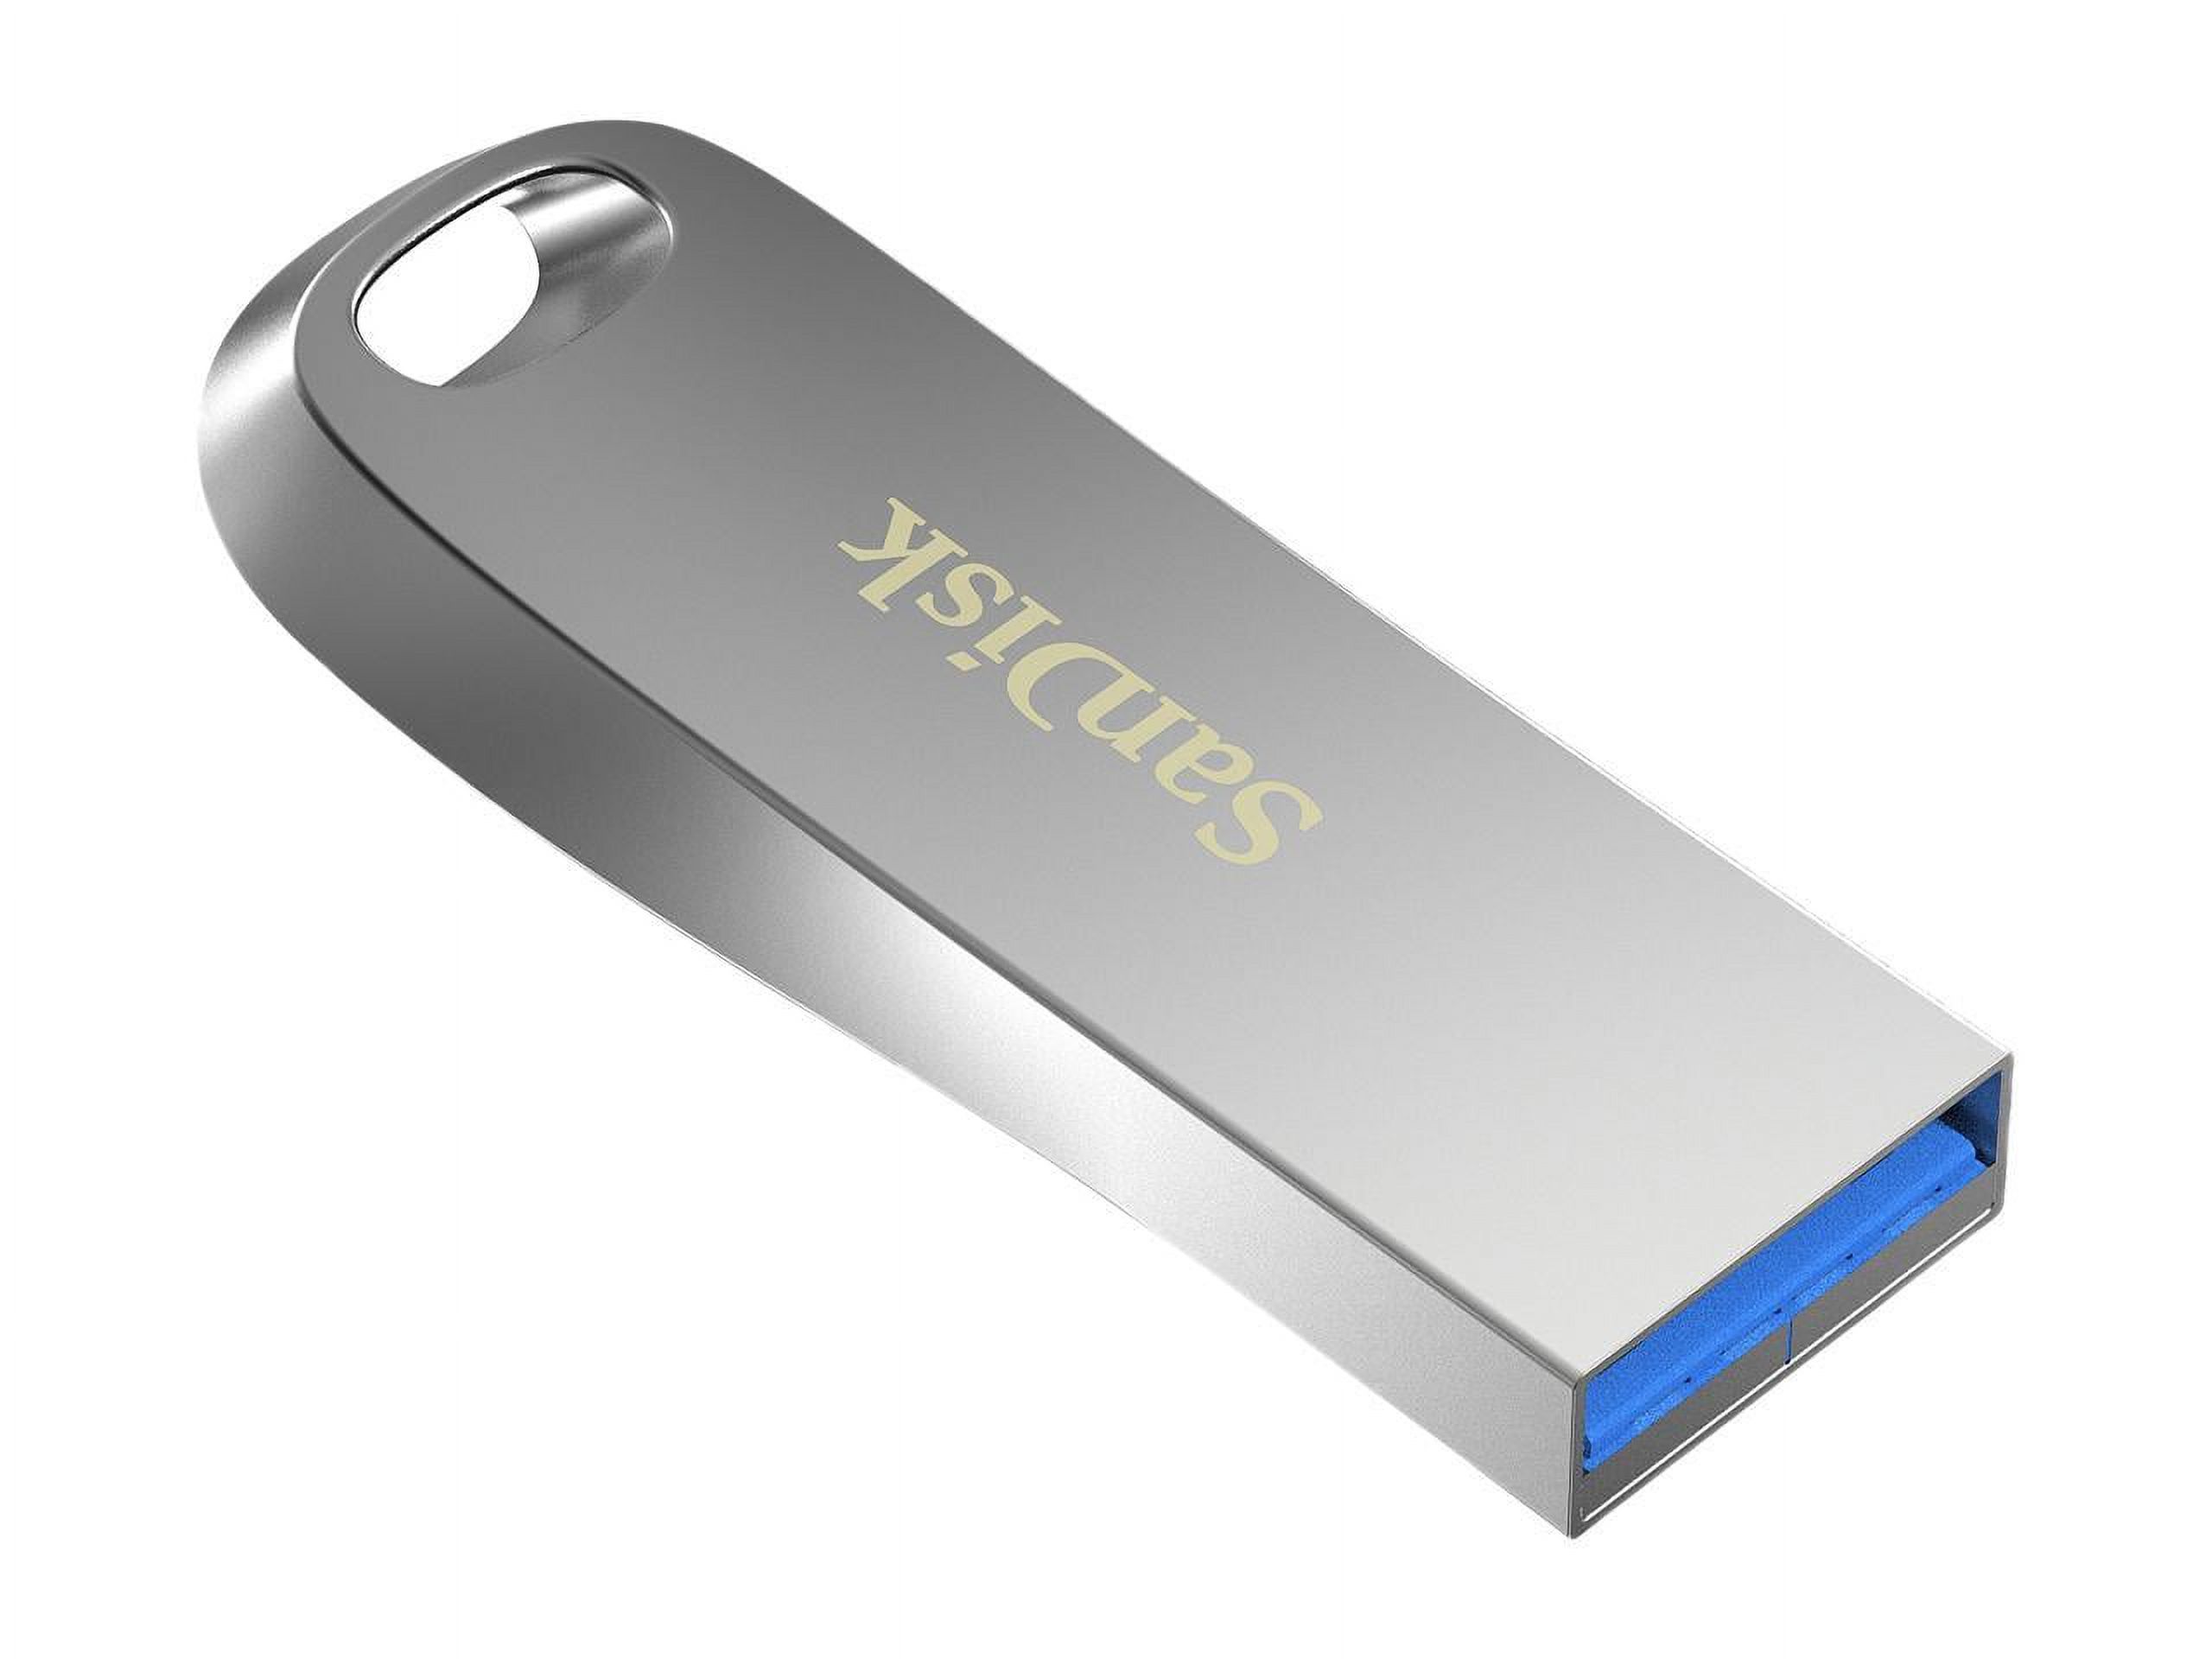 SanDisk 64GB Ultra Luxe USB 3.1 Flash Drive, Speed Up to 150MB/s (SDCZ74-064G-G46) - image 4 of 5